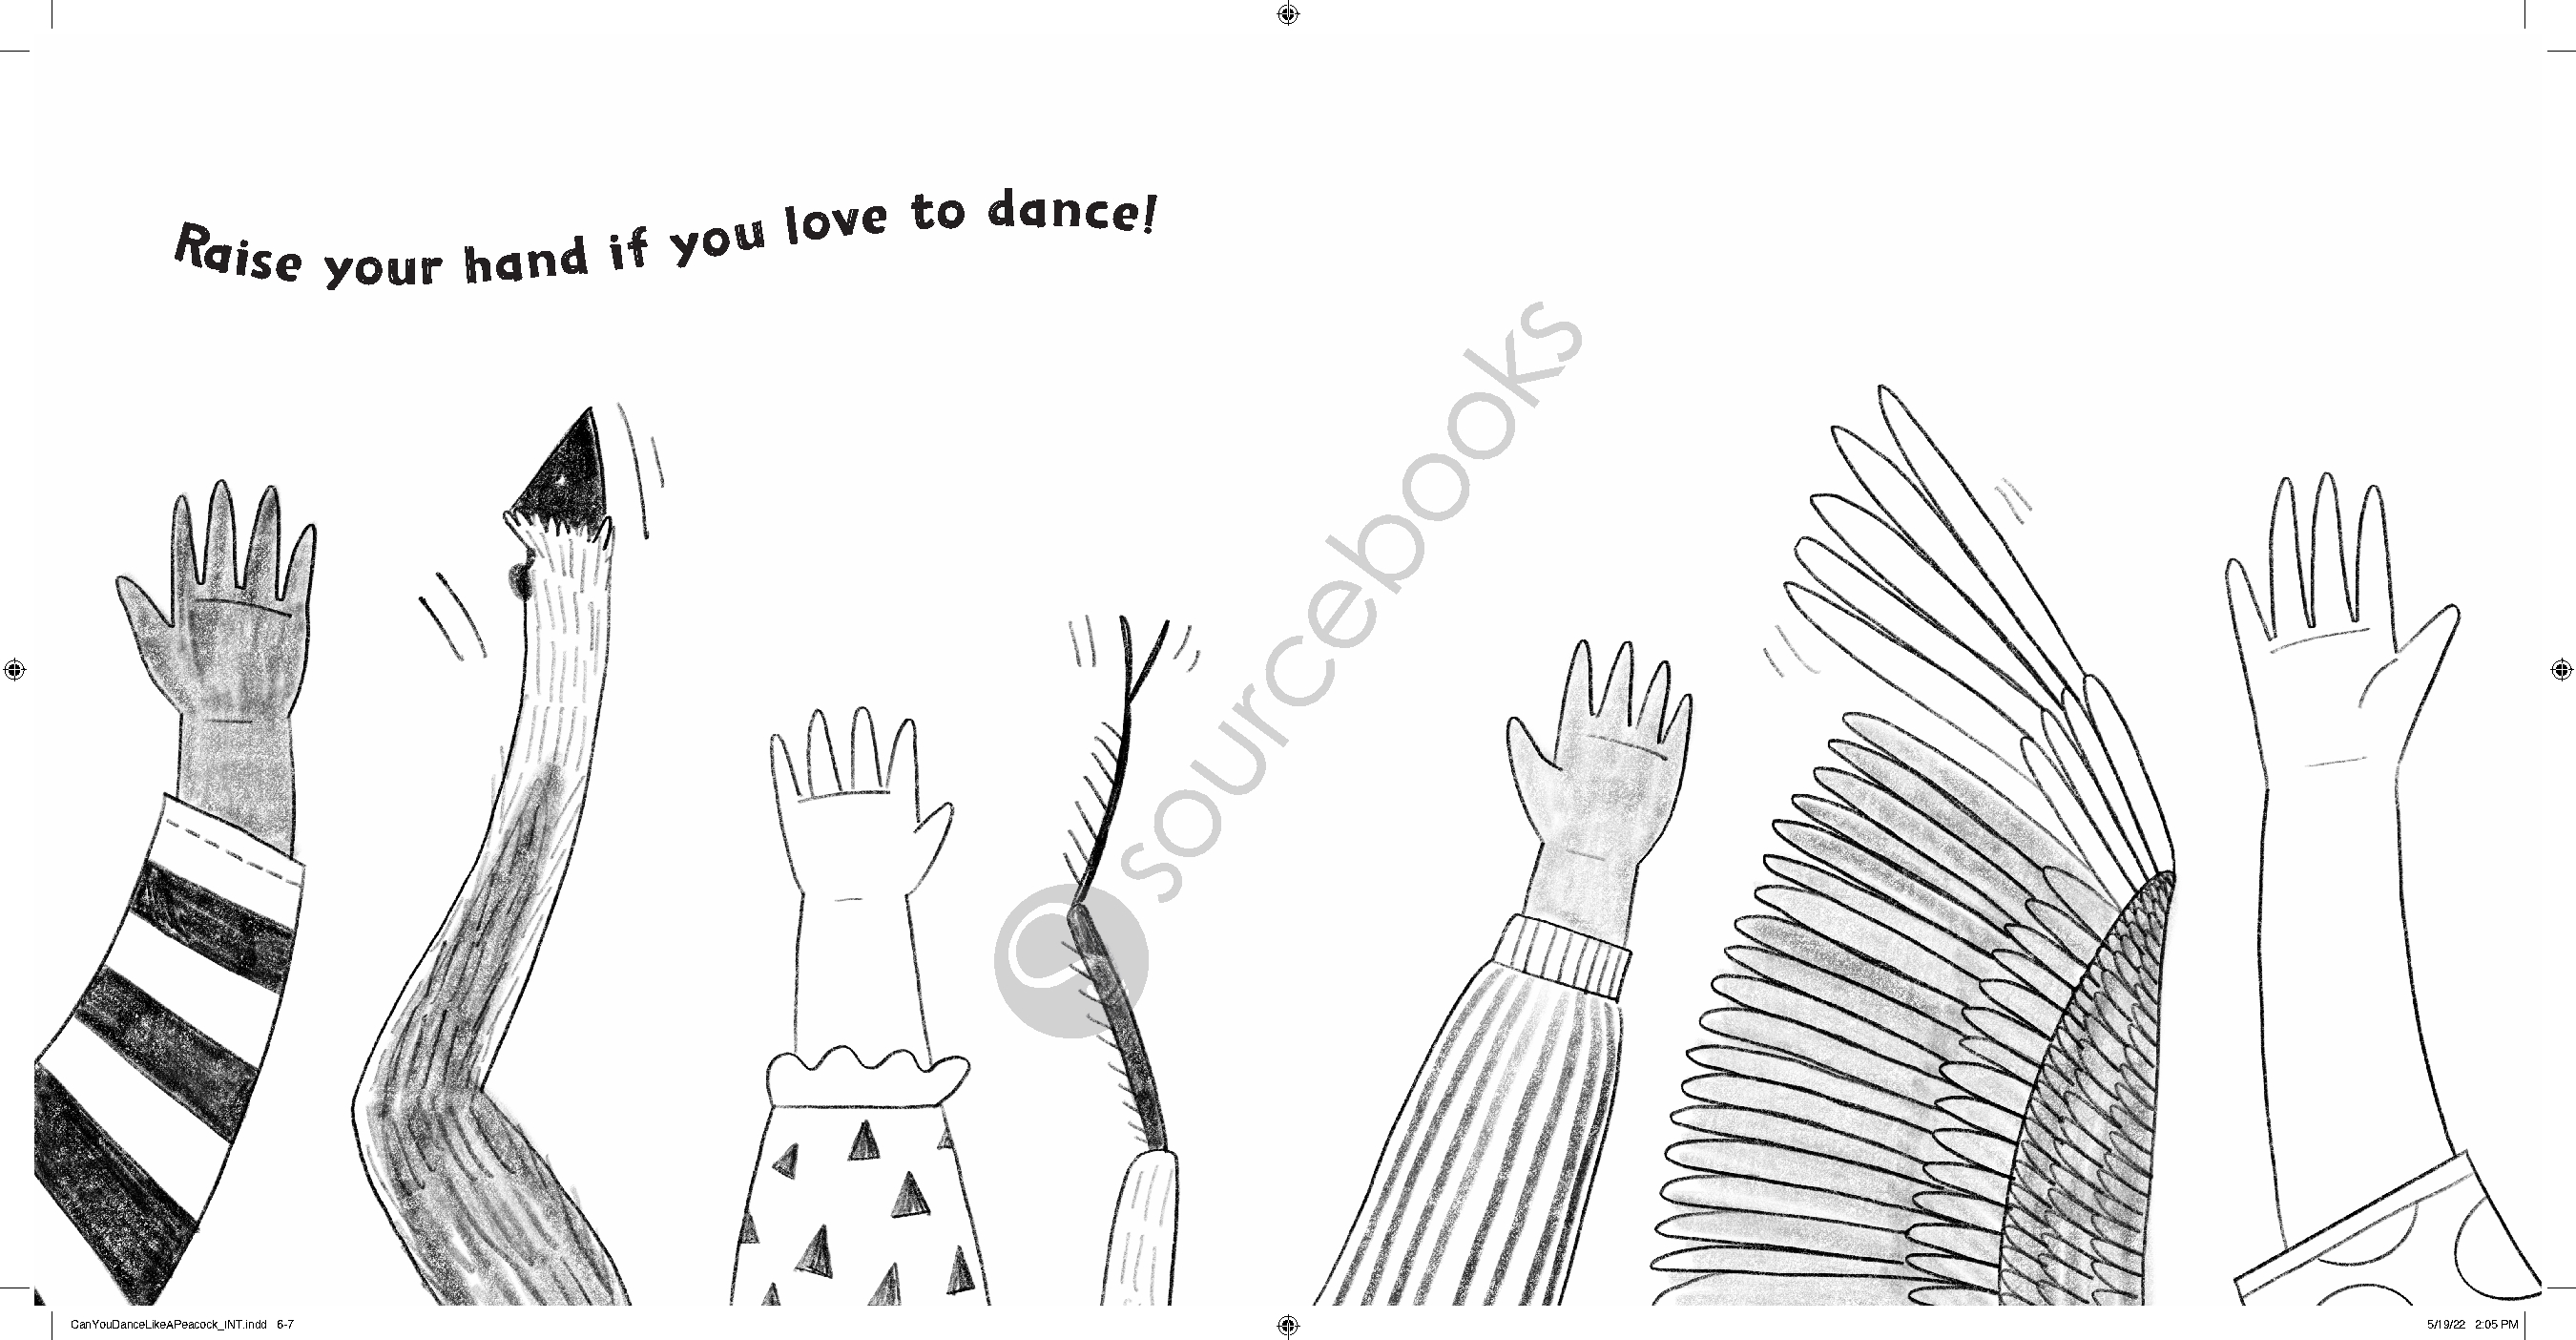 Can You Dance Like a Peacock?